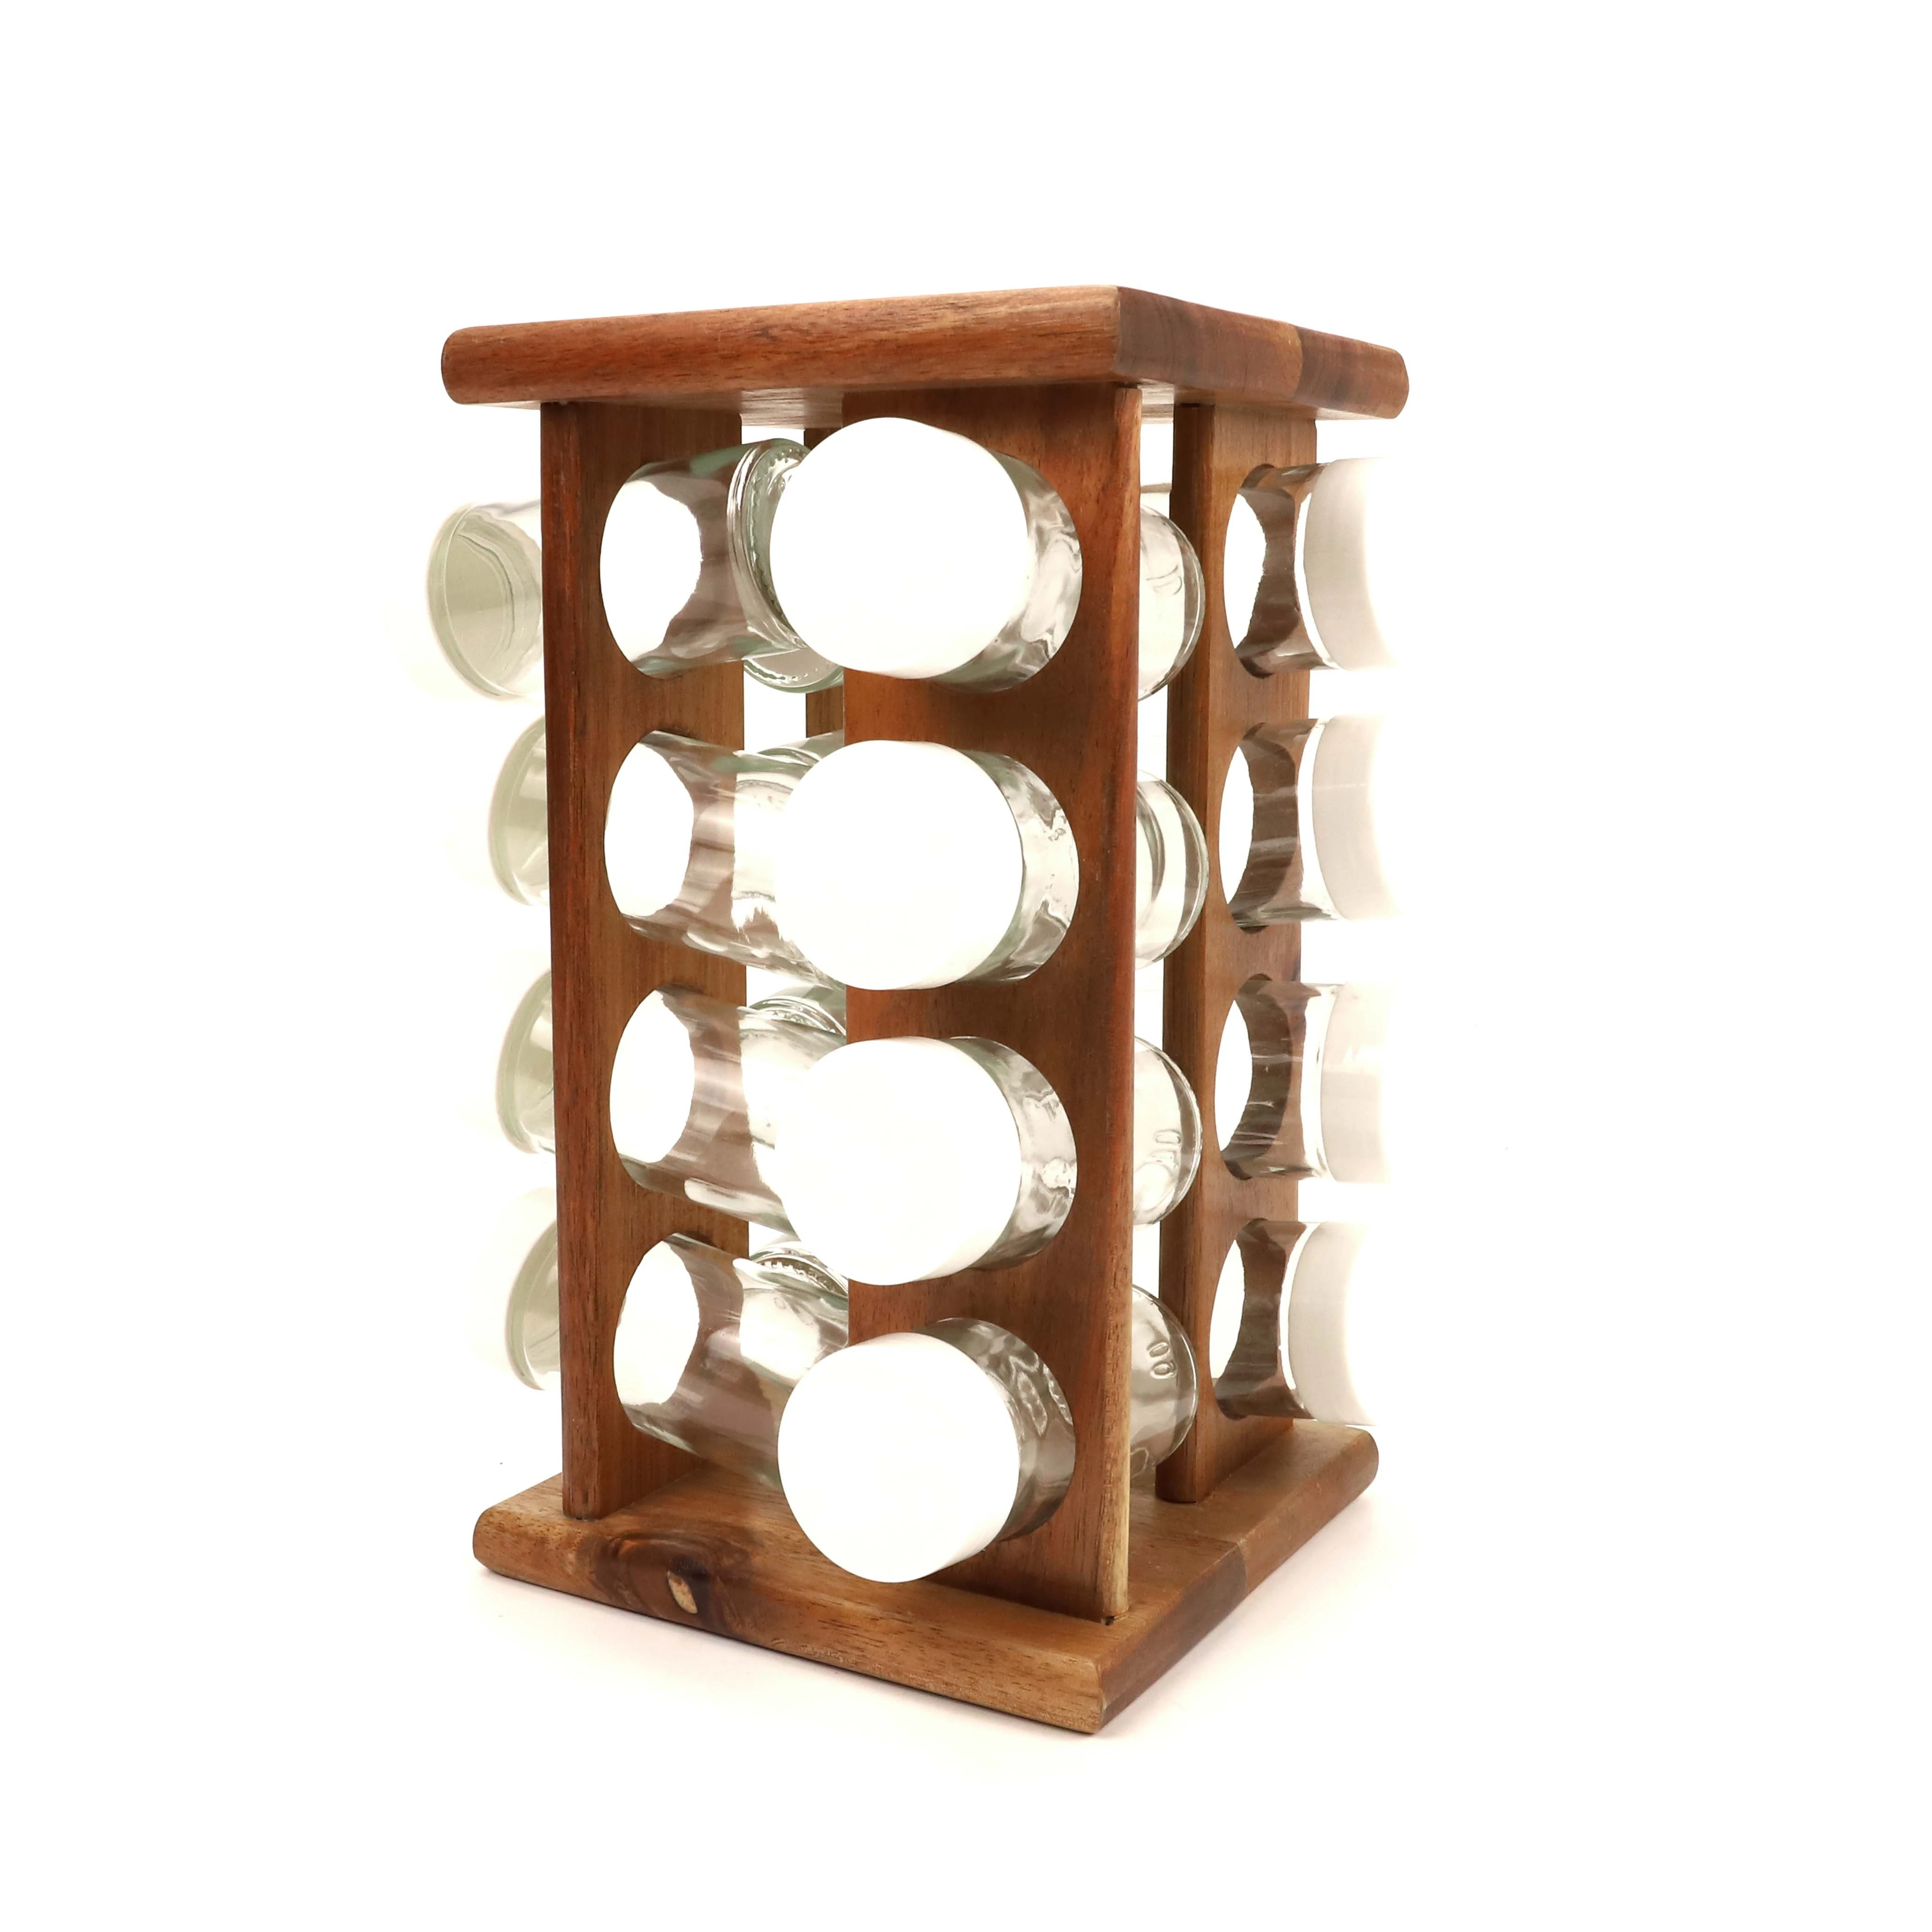 Bamboo Herb & Spice Shelf Stand holder with 23 Glass Jars Bamboo Spice Rack Organizer